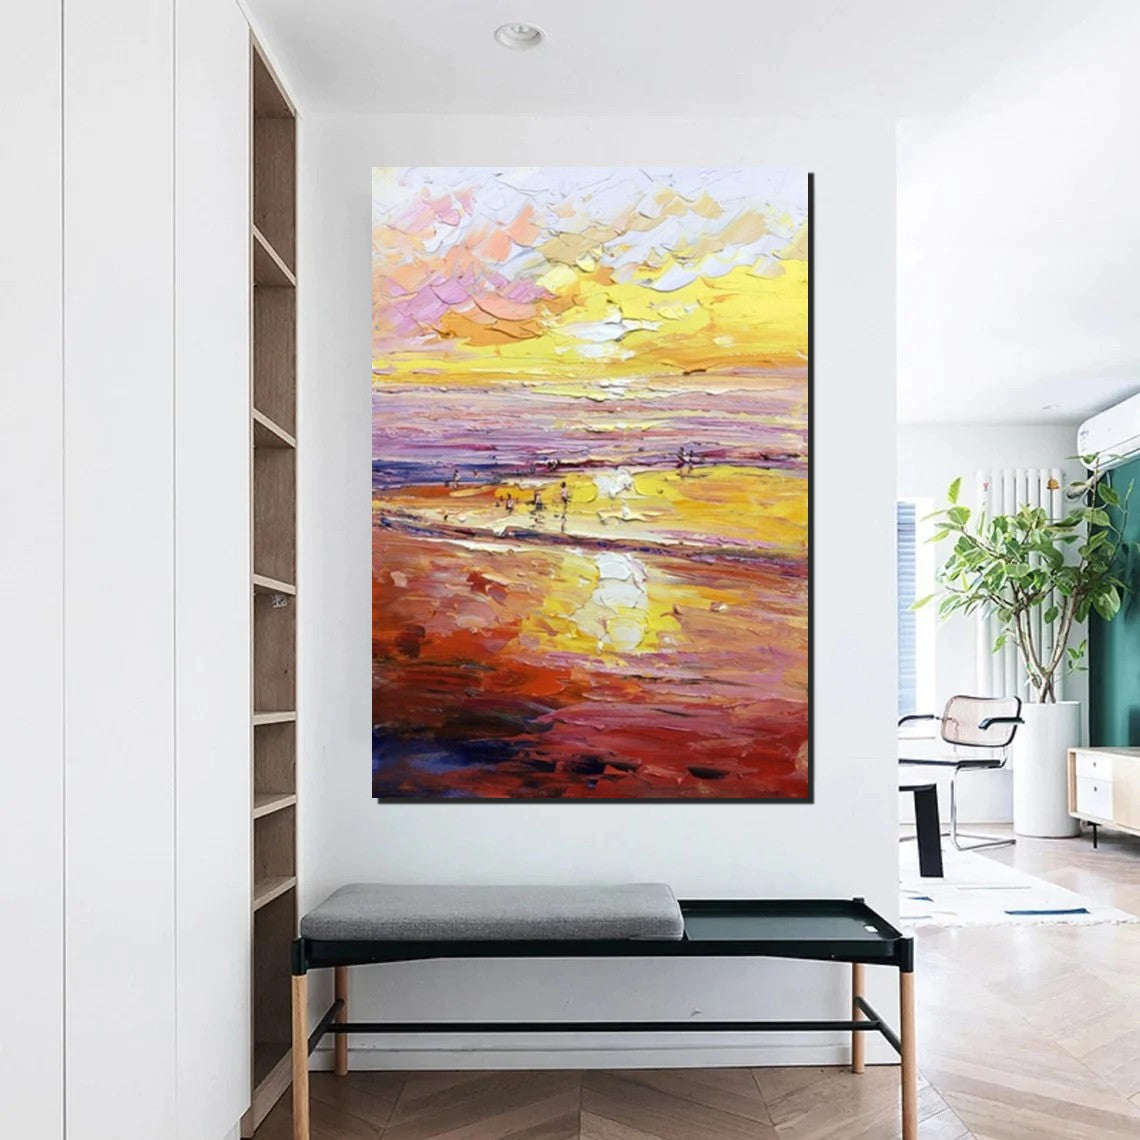 Canvas Paintings for Bedroom, Large Paintings on Canvas, Landscape Painting for Living Room, Sunrise Seashore Painting, Heavy Texture Paintings-HomePaintingDecor